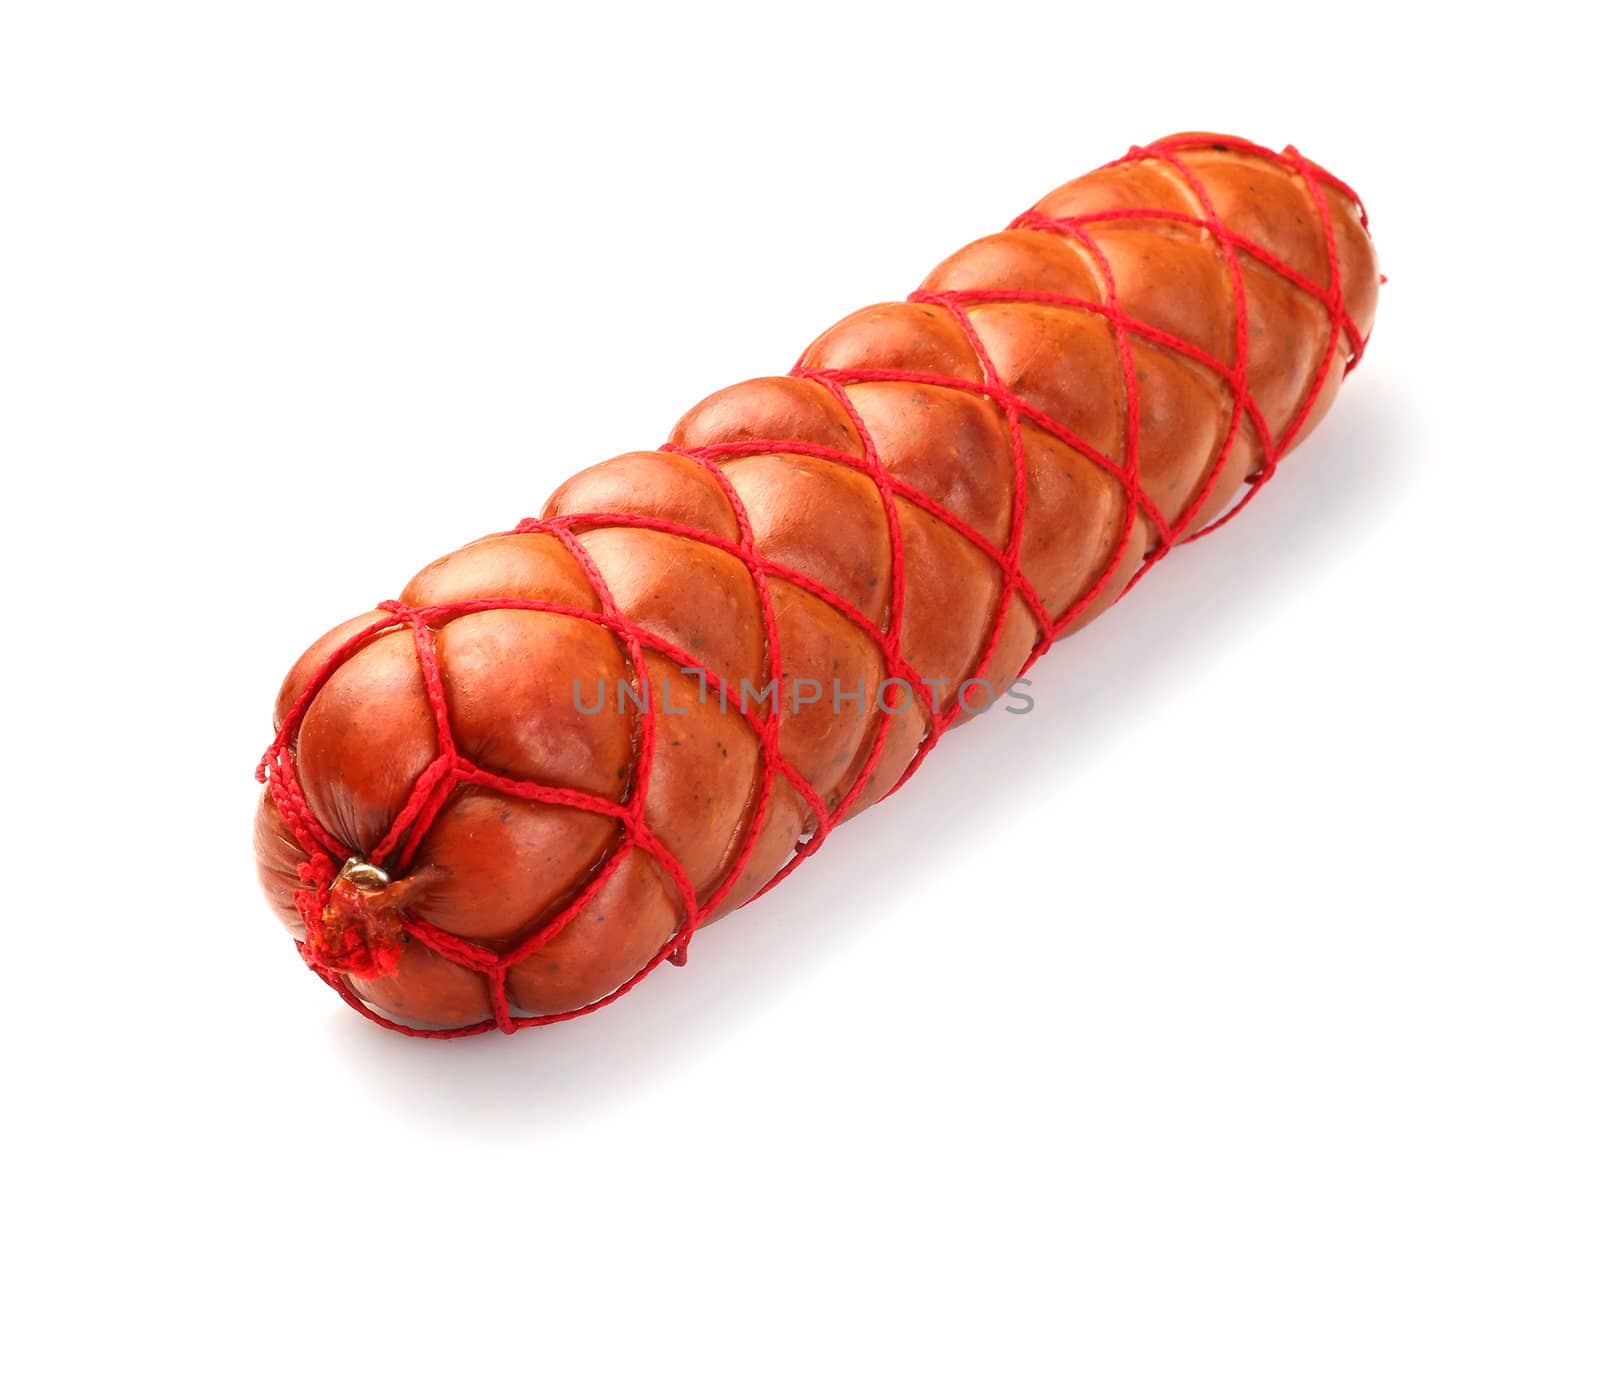 Sausage braided with red strand
